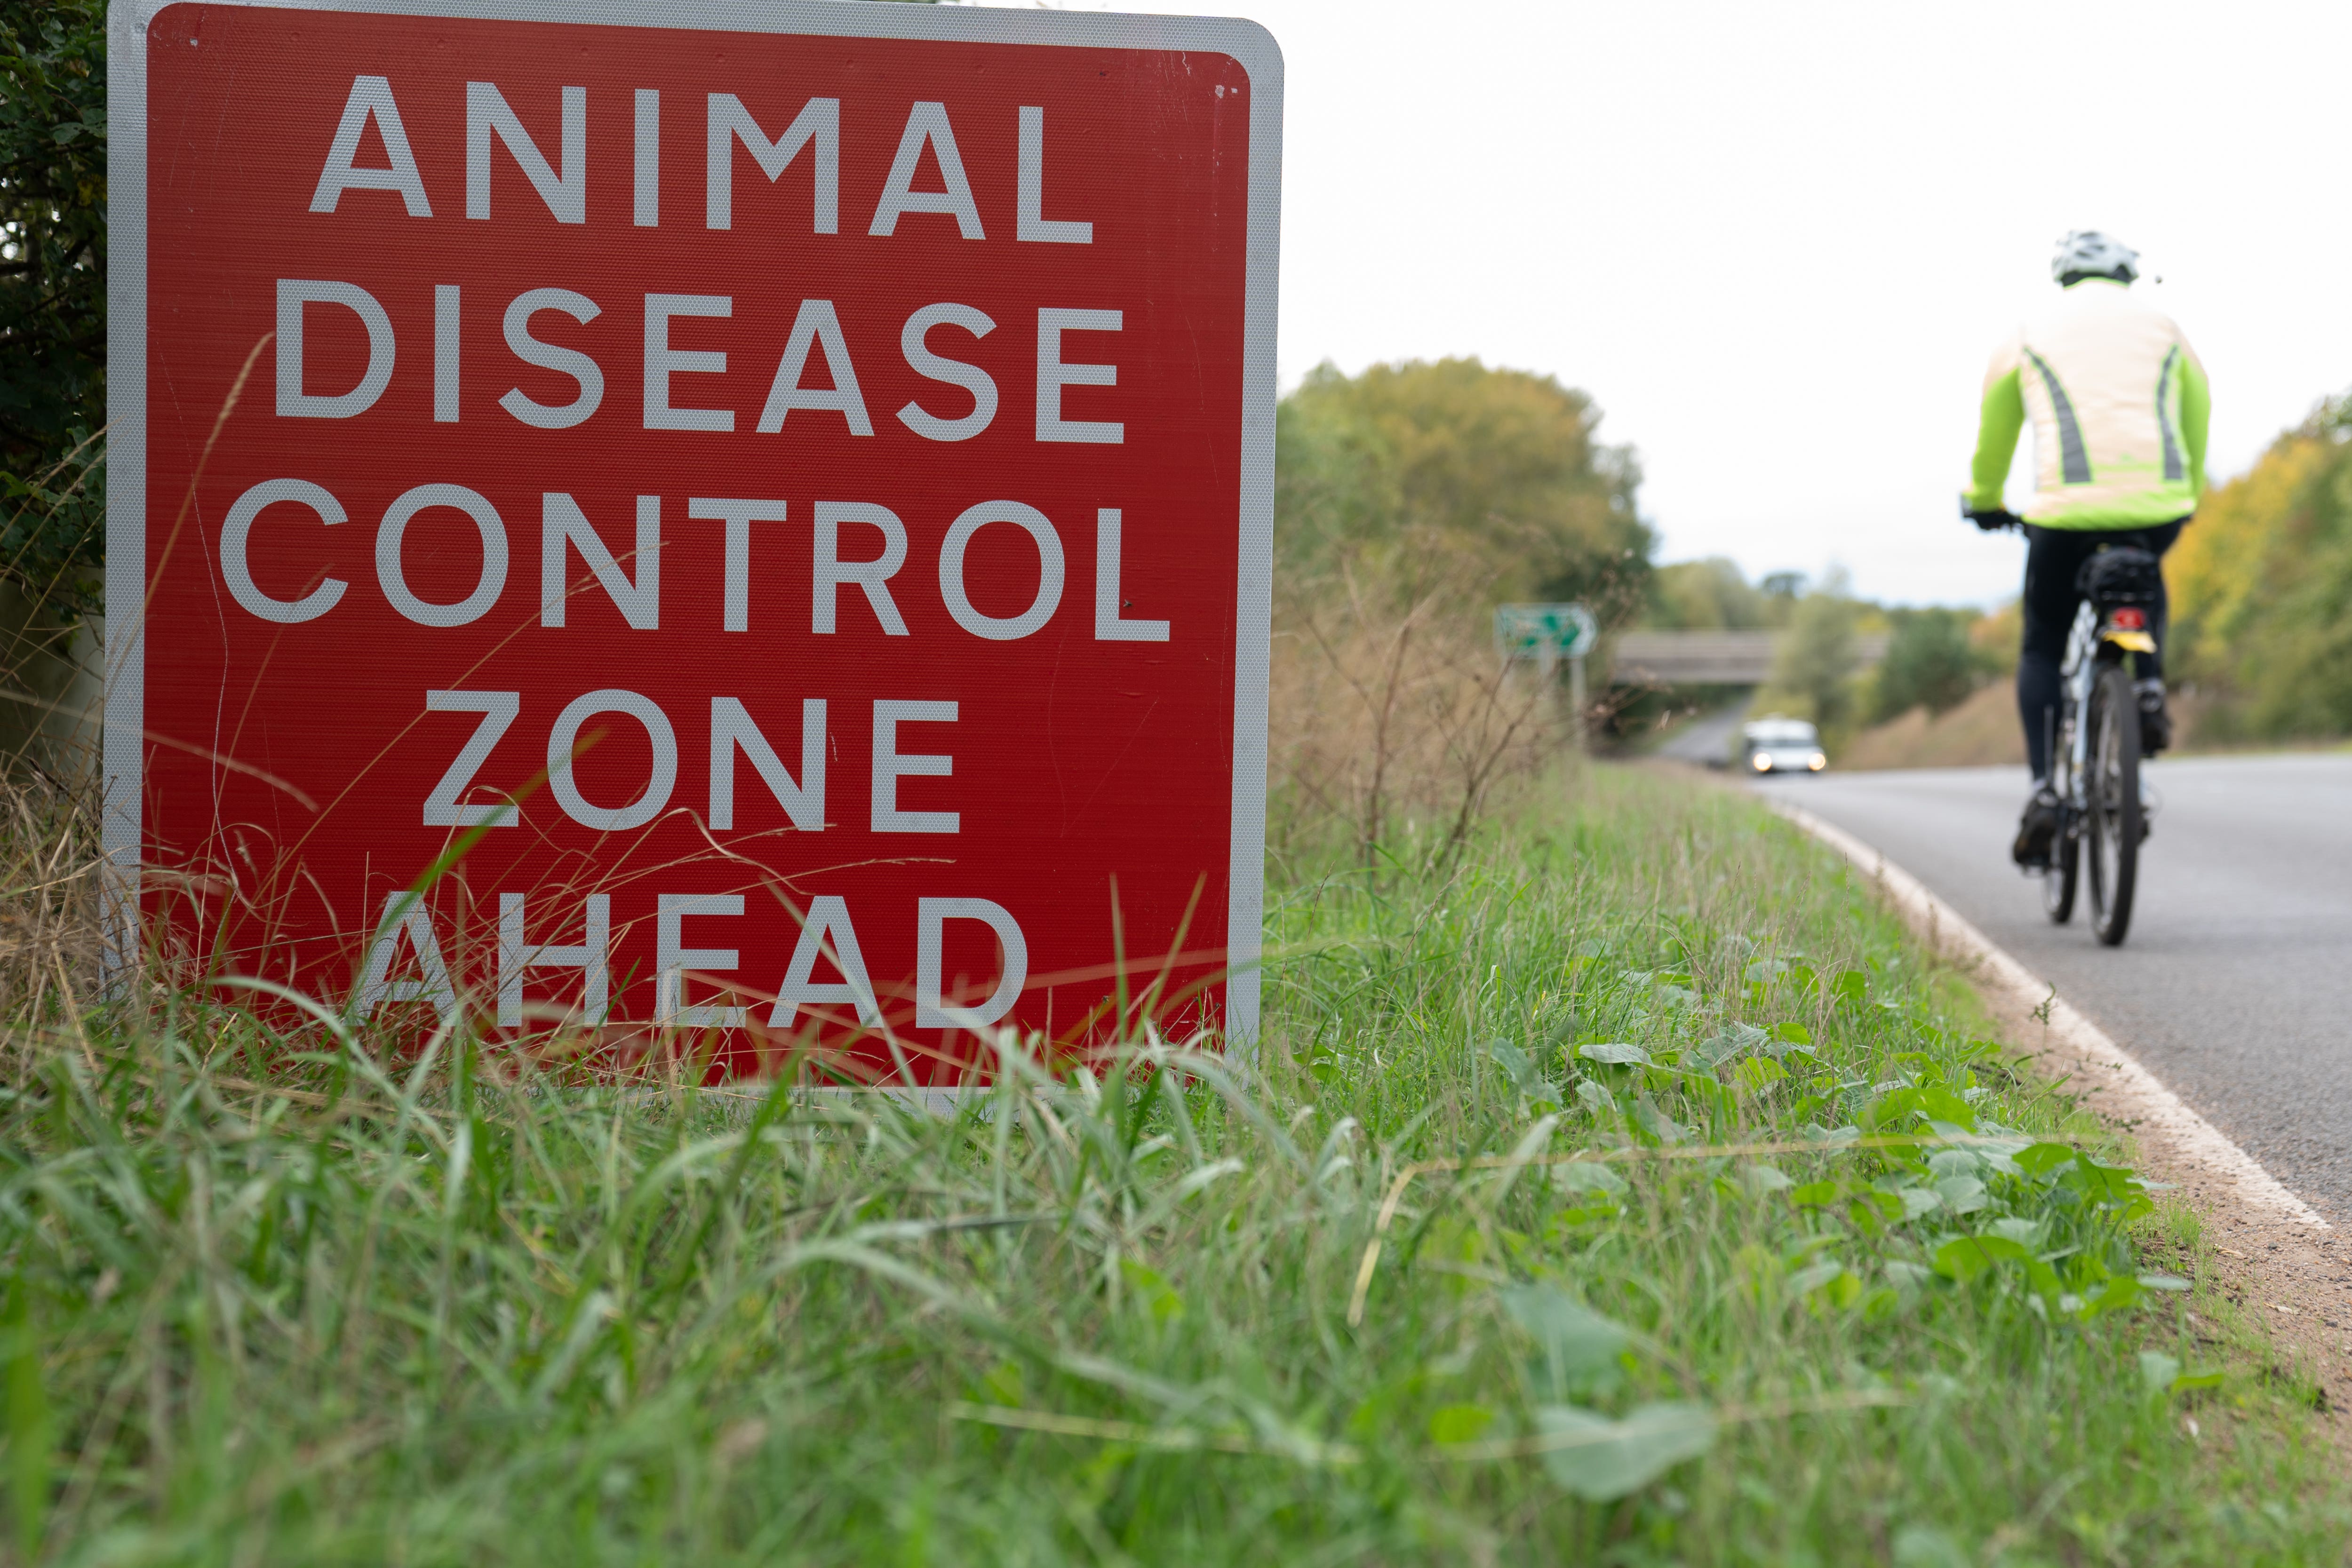 Bird flu was detected in two people in the UK in May